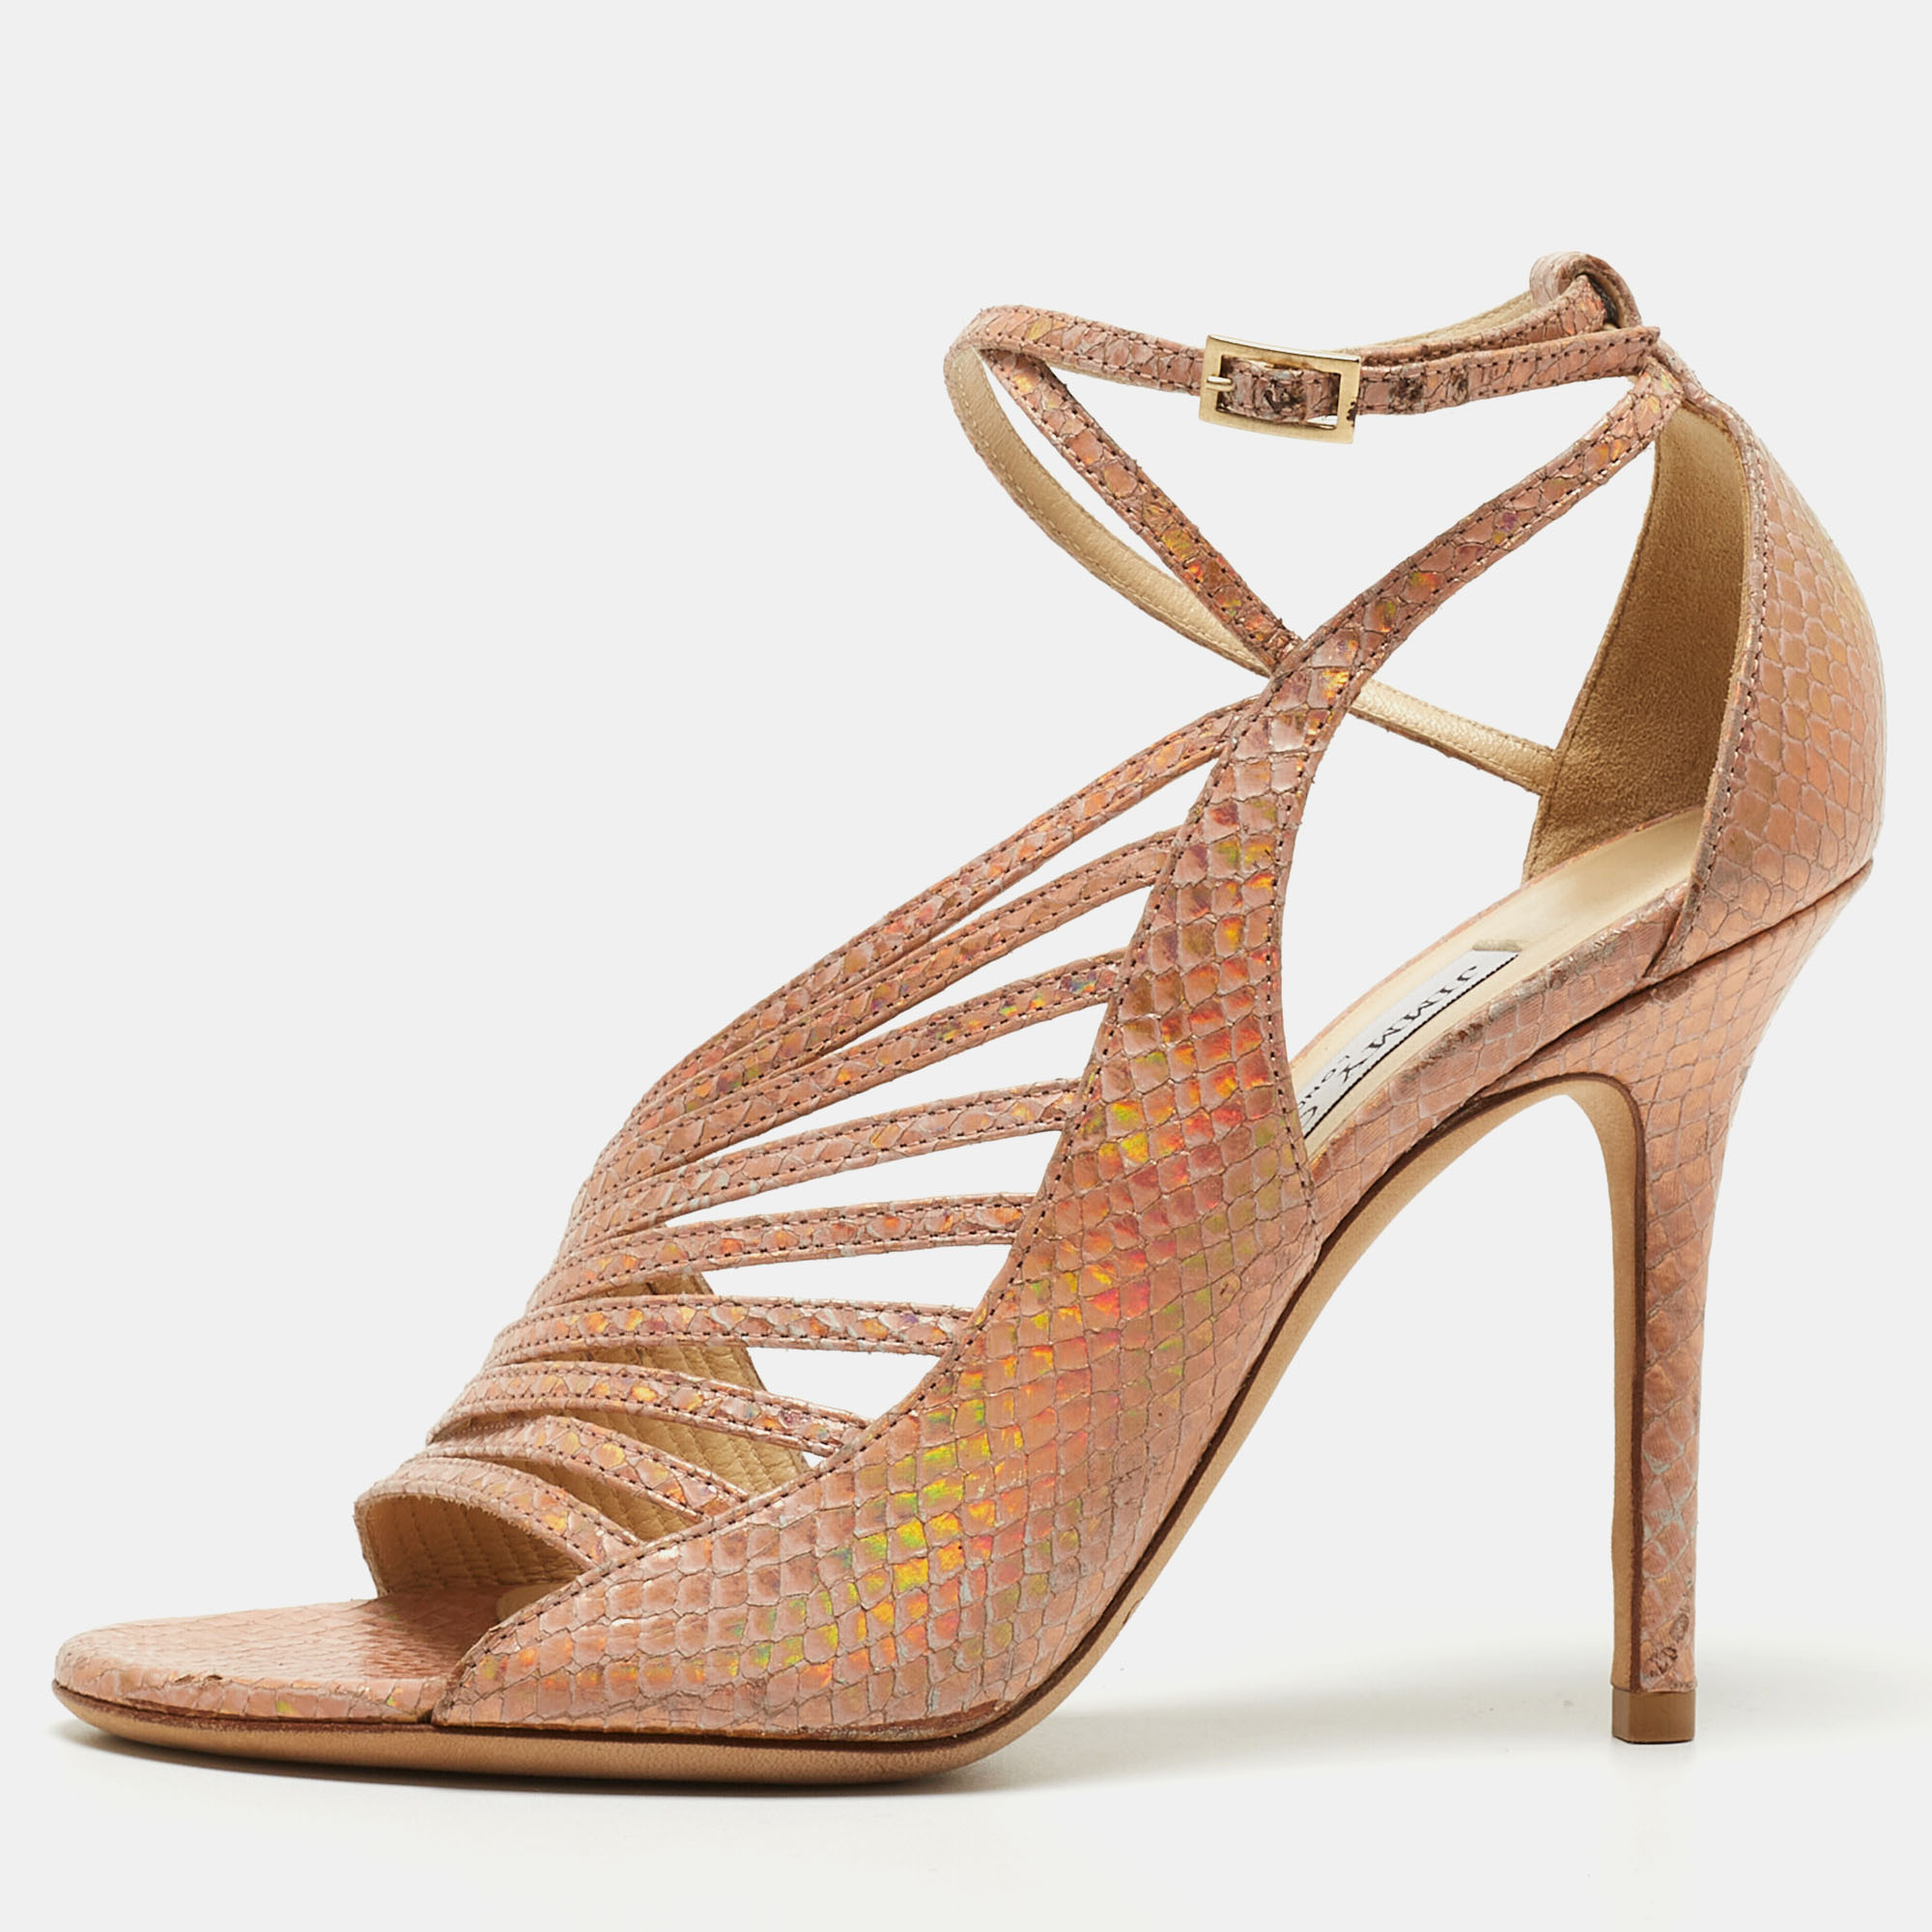 Jimmy Choo Metallic Pink Embossed Leather Strappy Open Toe Ankle Strap Sandals Size 36.5